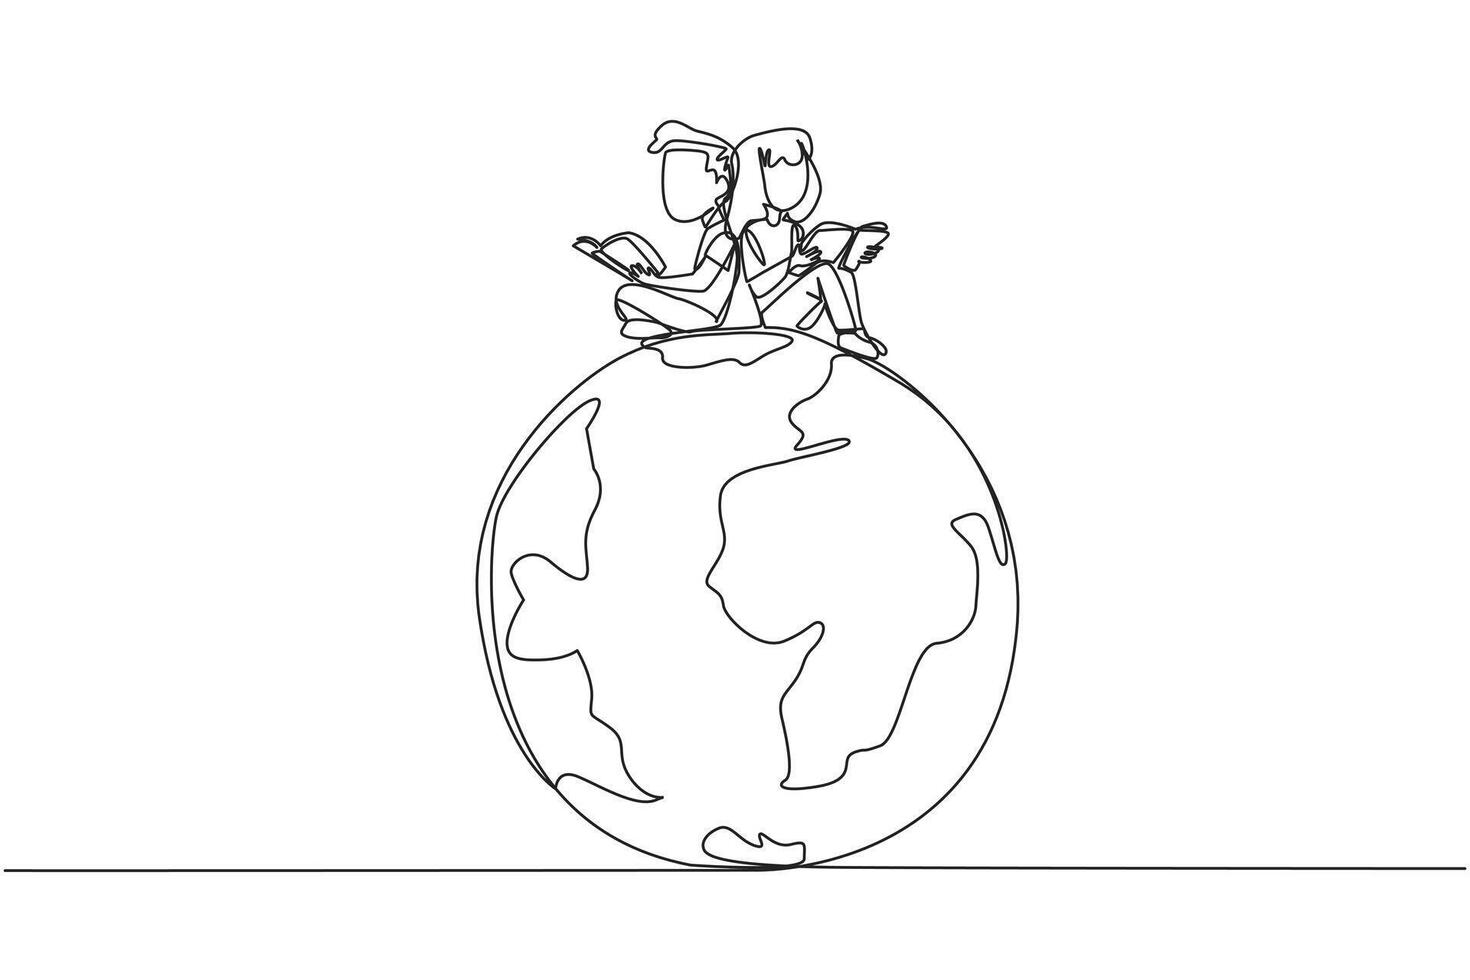 Single one line drawing happy kids sitting on big globe reading a book. The metaphor of reading can reach the world. Read everywhere. Book festival concept. Continuous line design graphic illustration vector